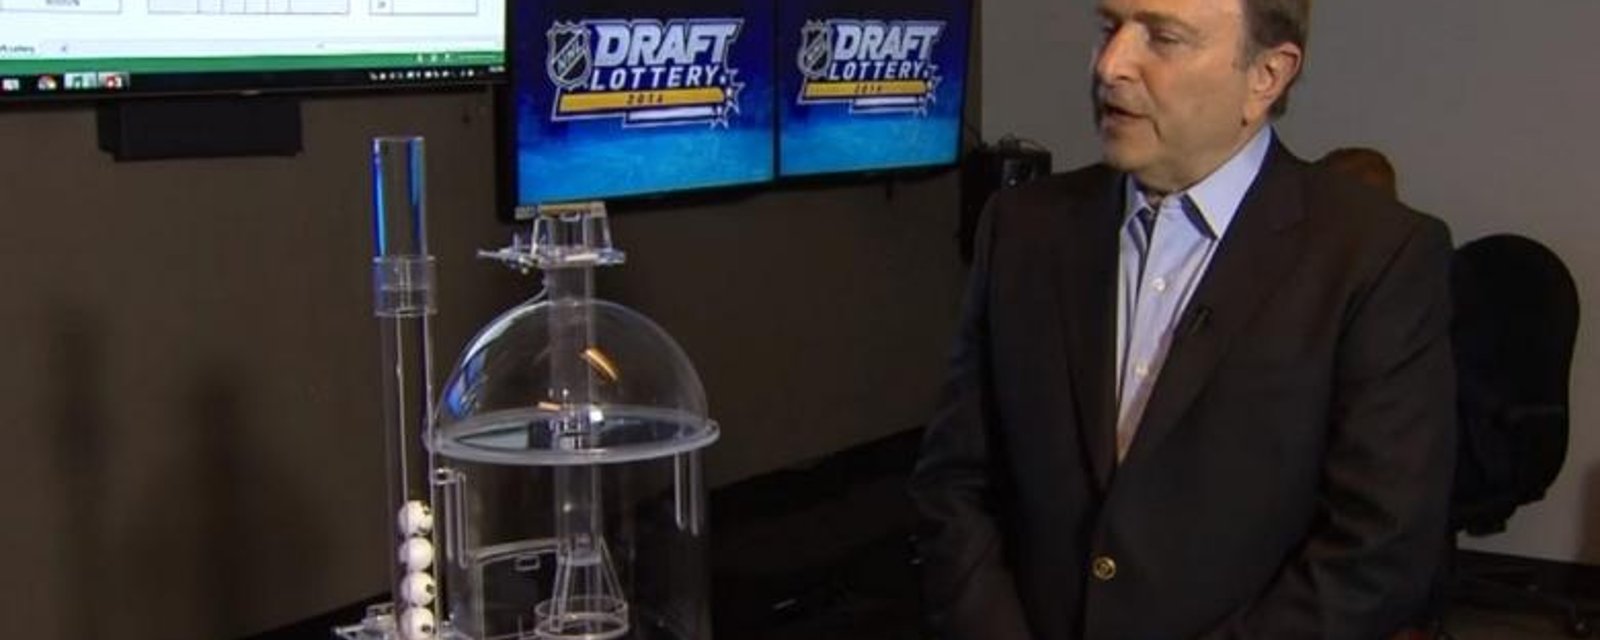 Behind the scenes look at how the Leafs won the Draft Lottery.